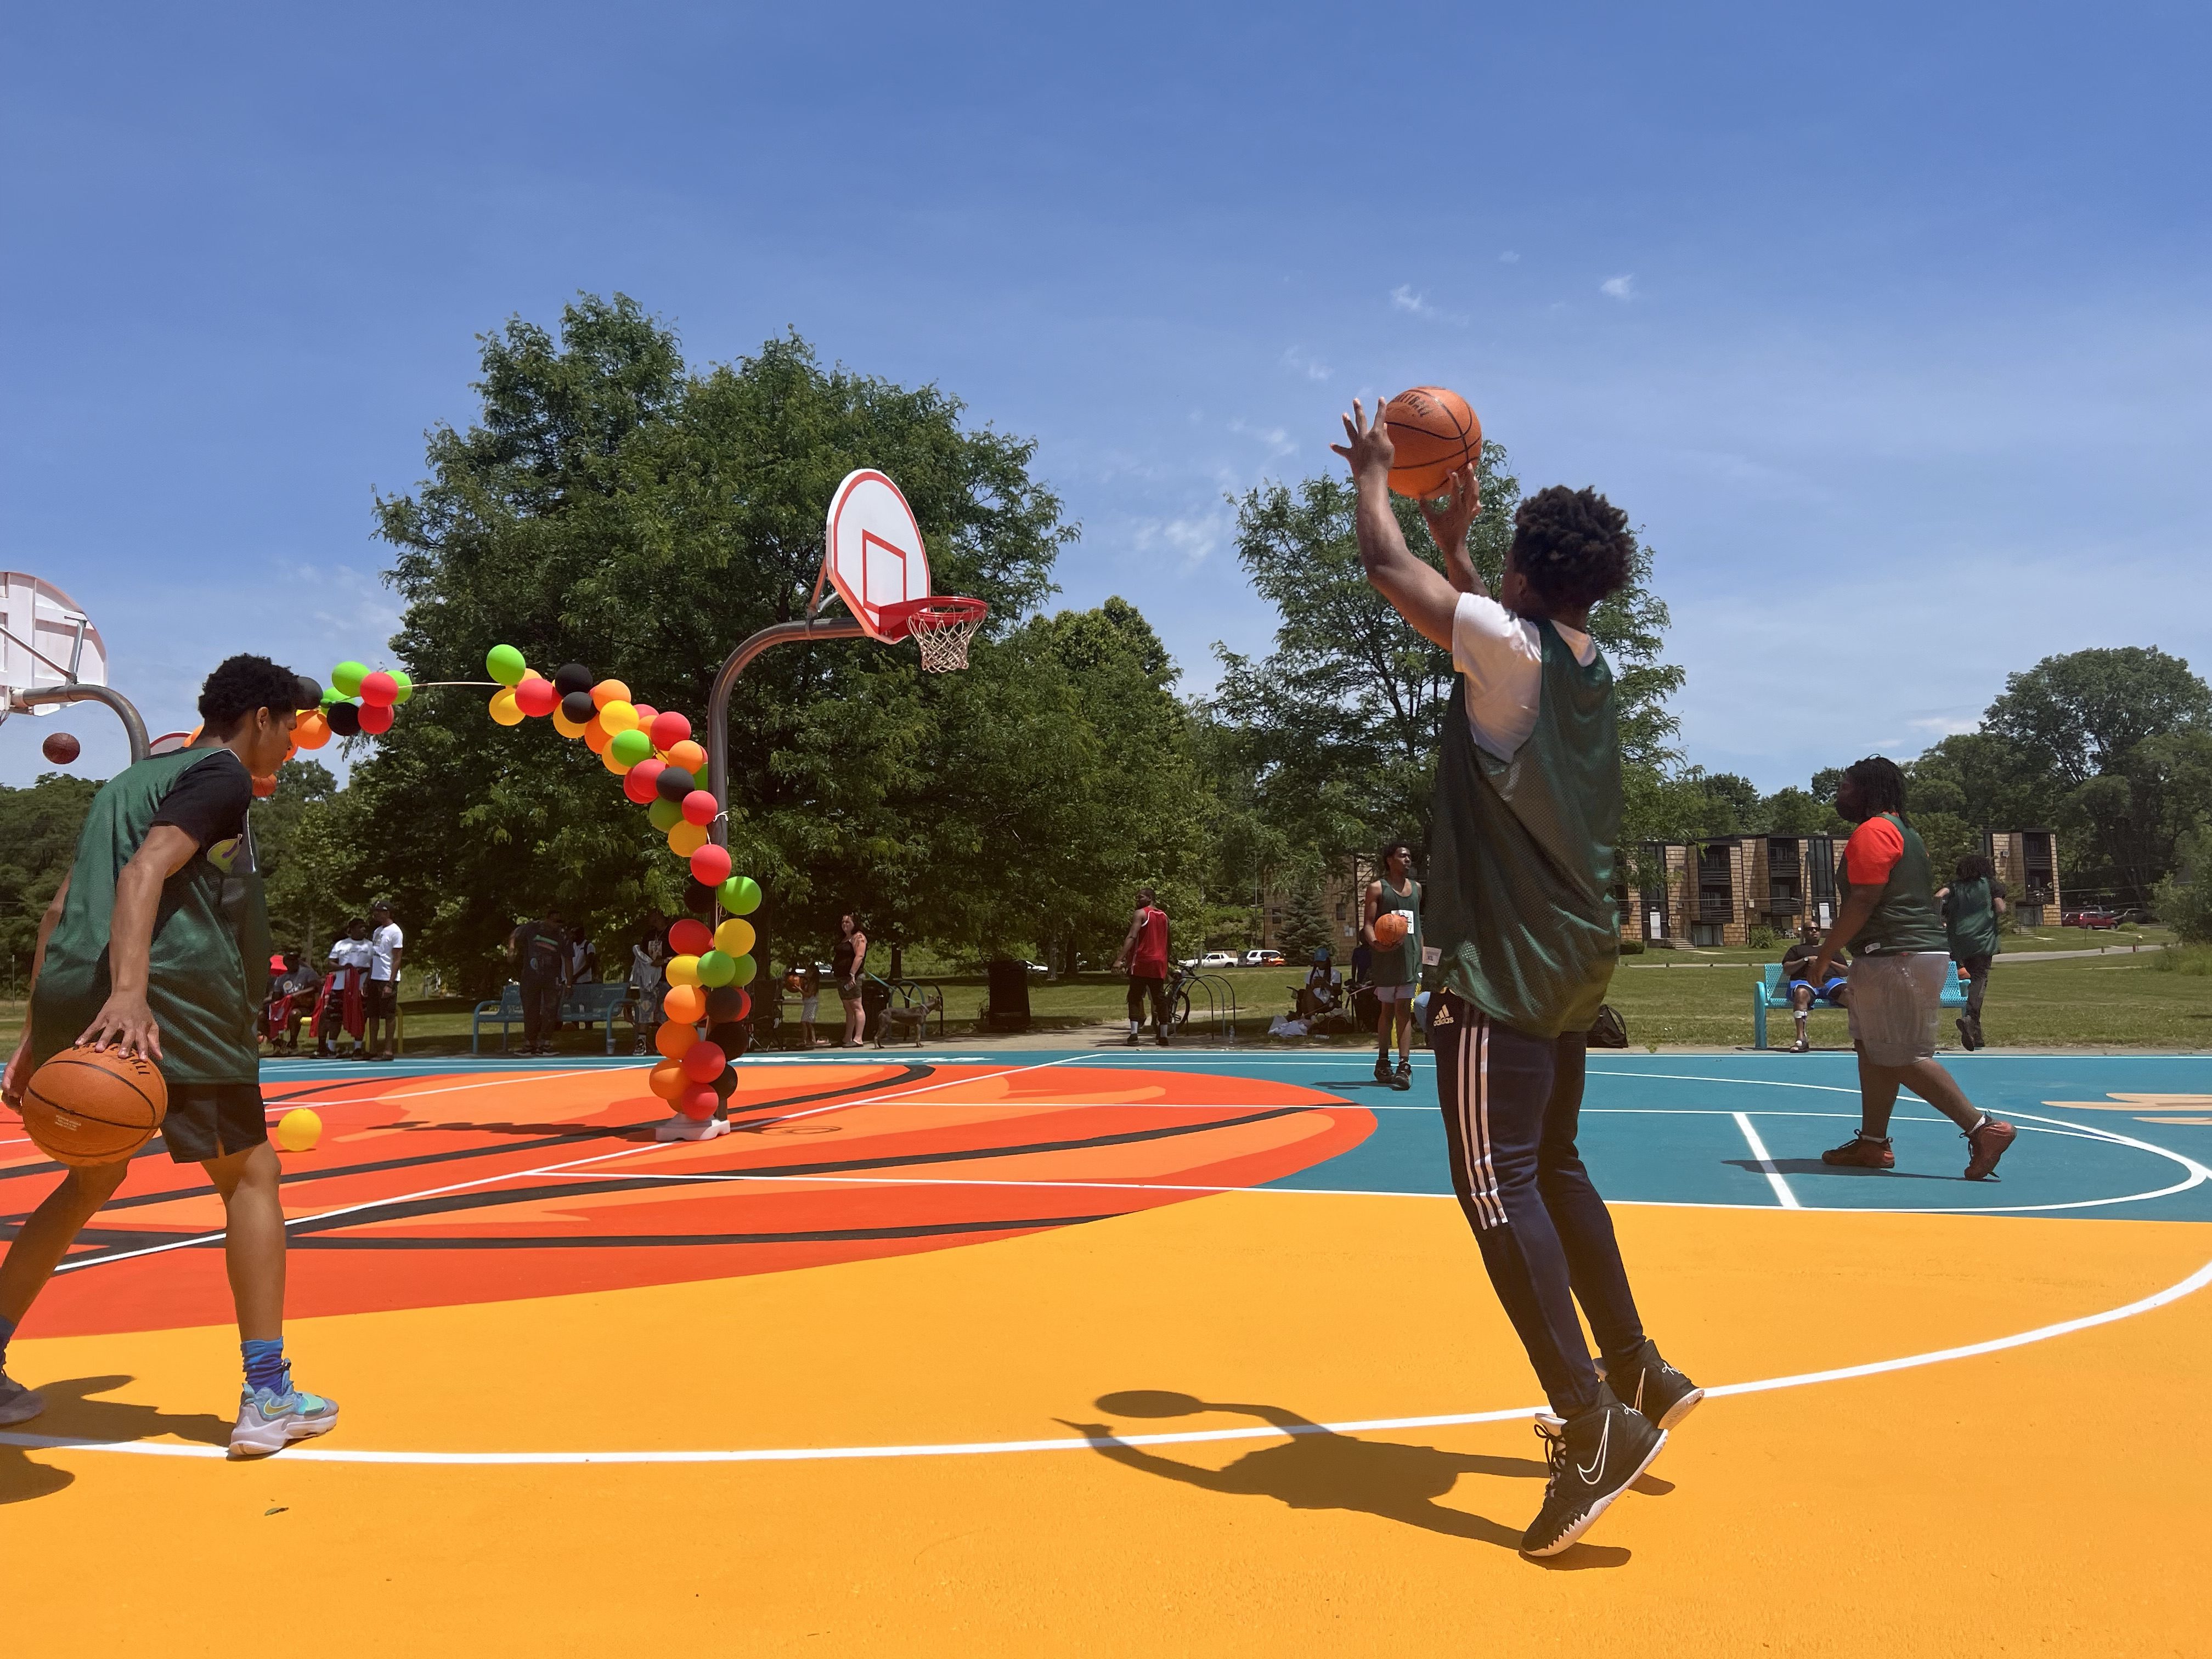 Tom Gores’ FlintNOW unveils ‘bright, vibrant’ refurbished basketball court as part of Juneteenth celebration